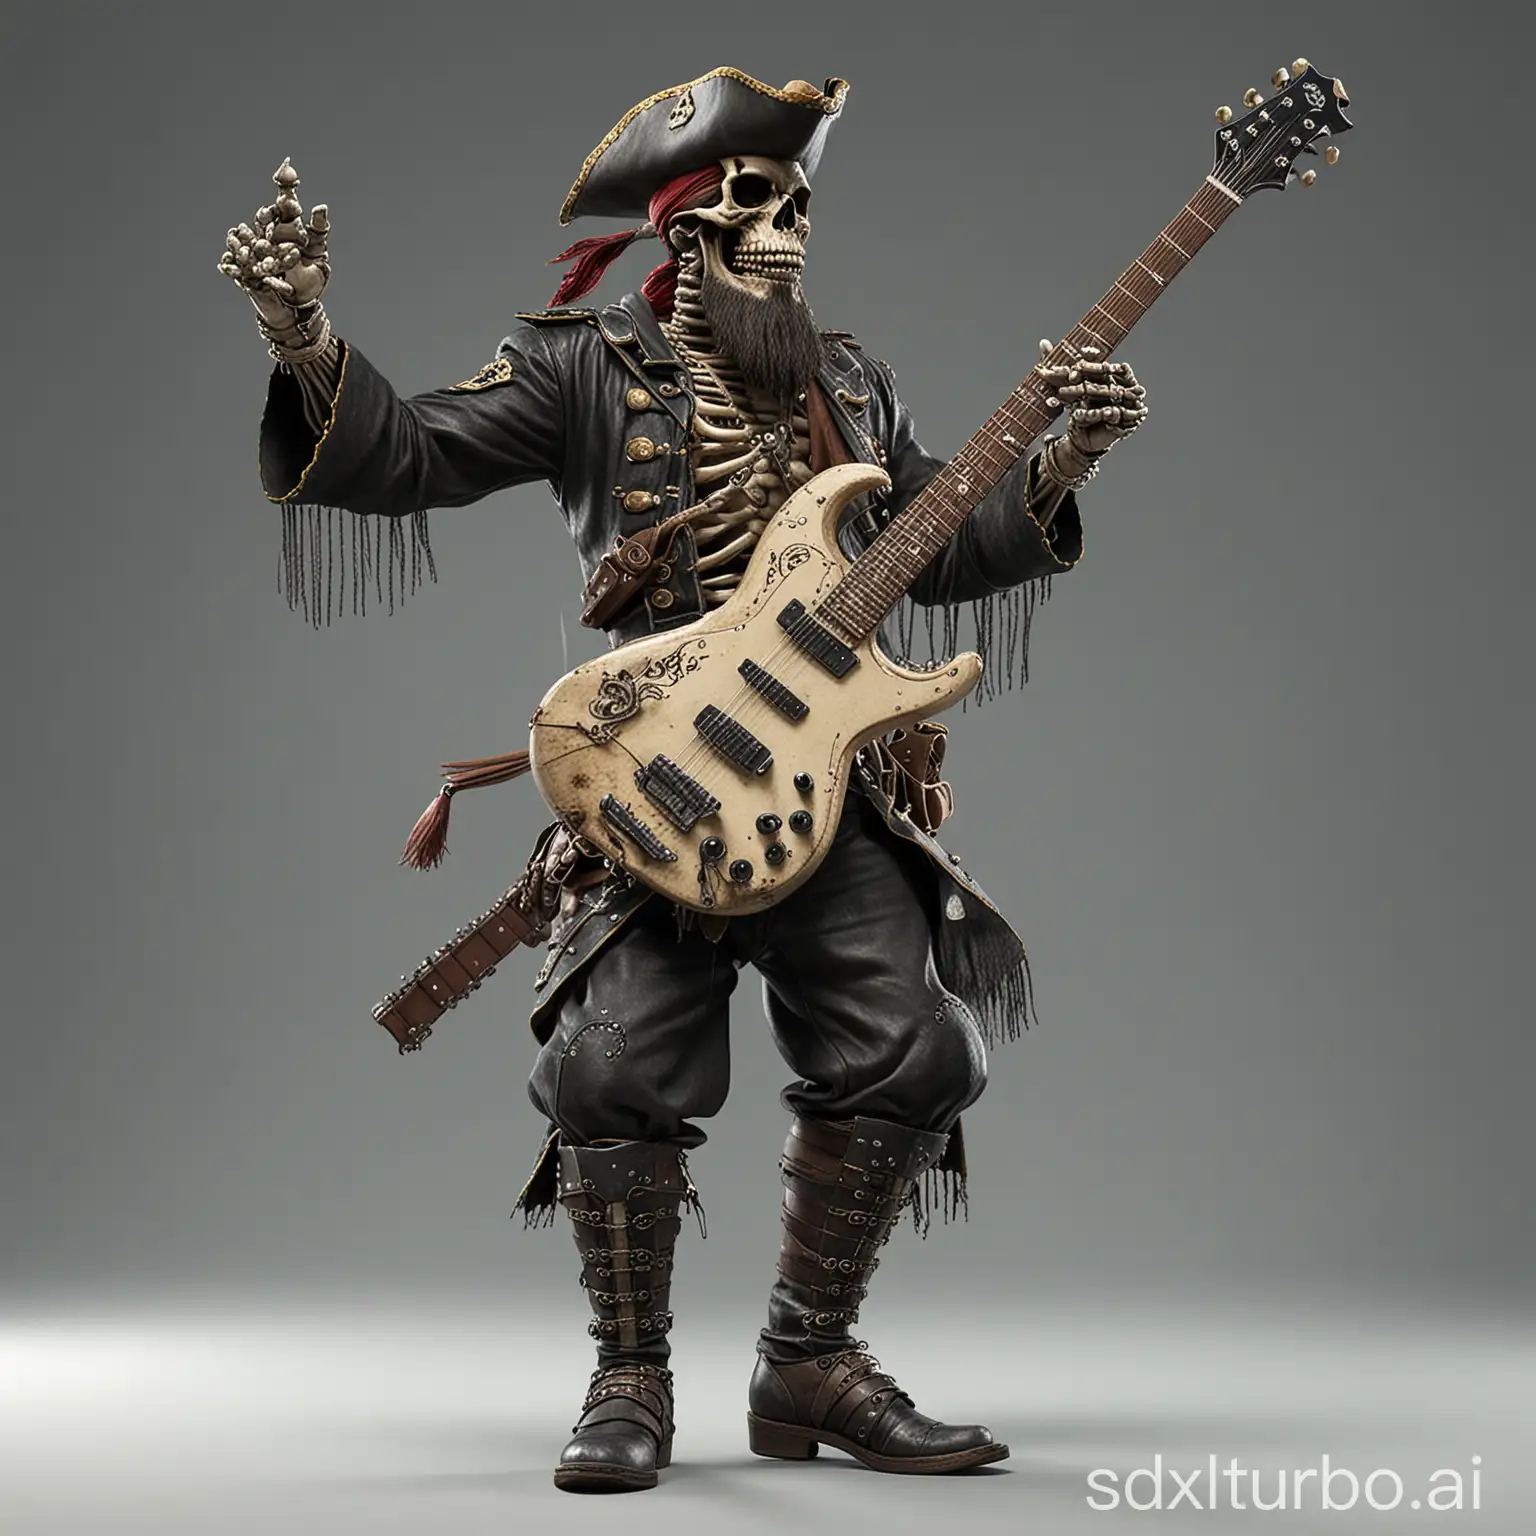 On a plain bacground is a A bearded skeleton pirate holding an electric guitar in a full body portrait is doing high kung fu kick with his left boot high into the air. This is a full body photo realistic high resolution image with sharp clean subject focus